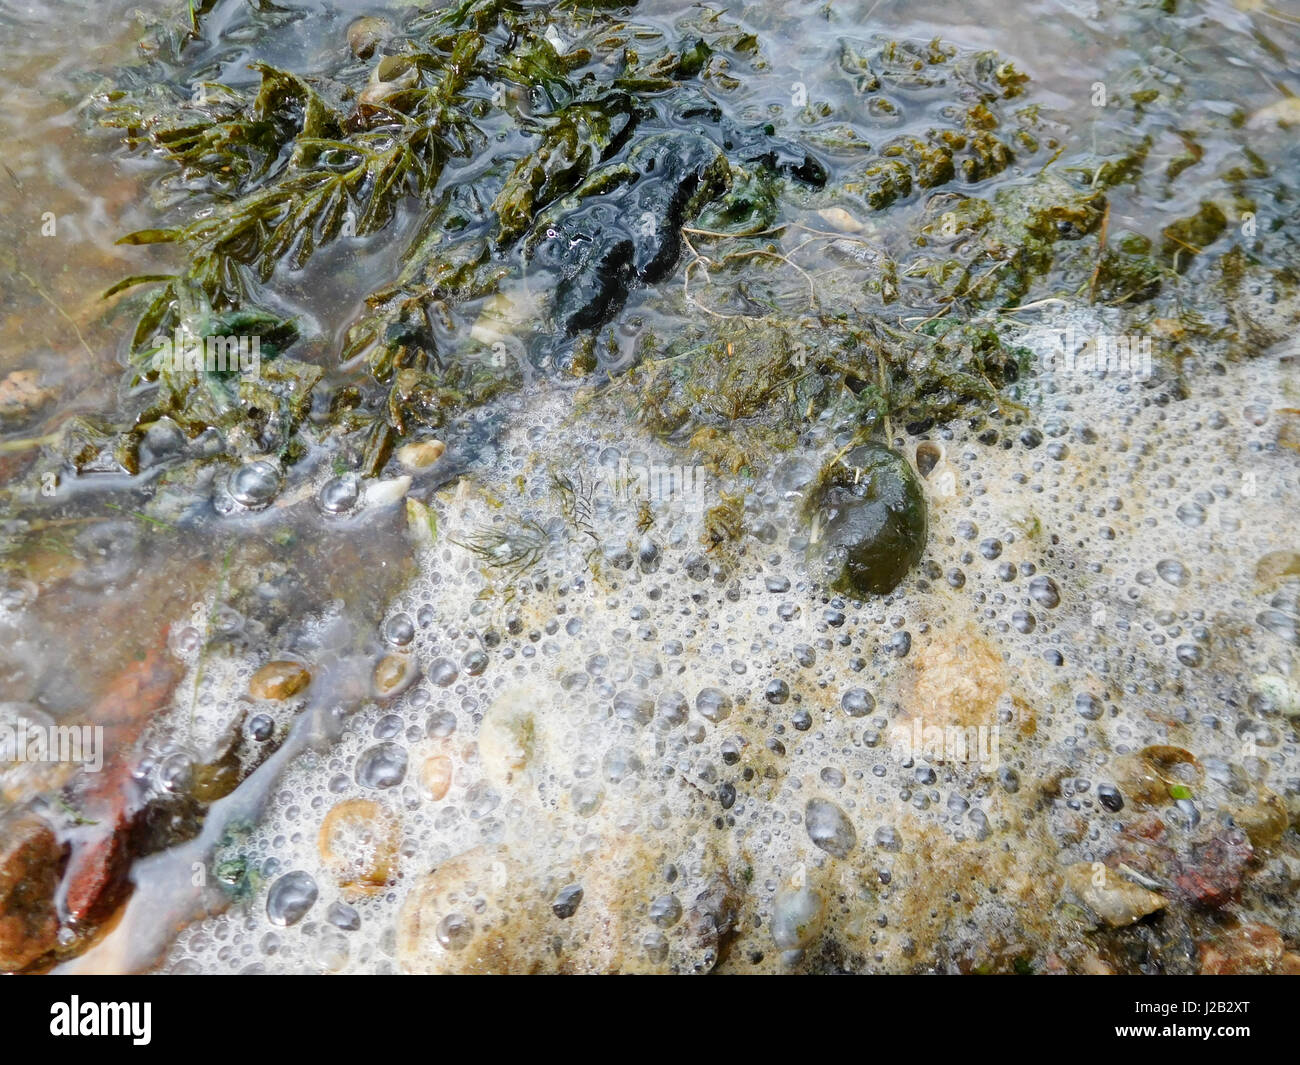 Close-up view of foam and weeds floating on a lake surface. Stock Photo